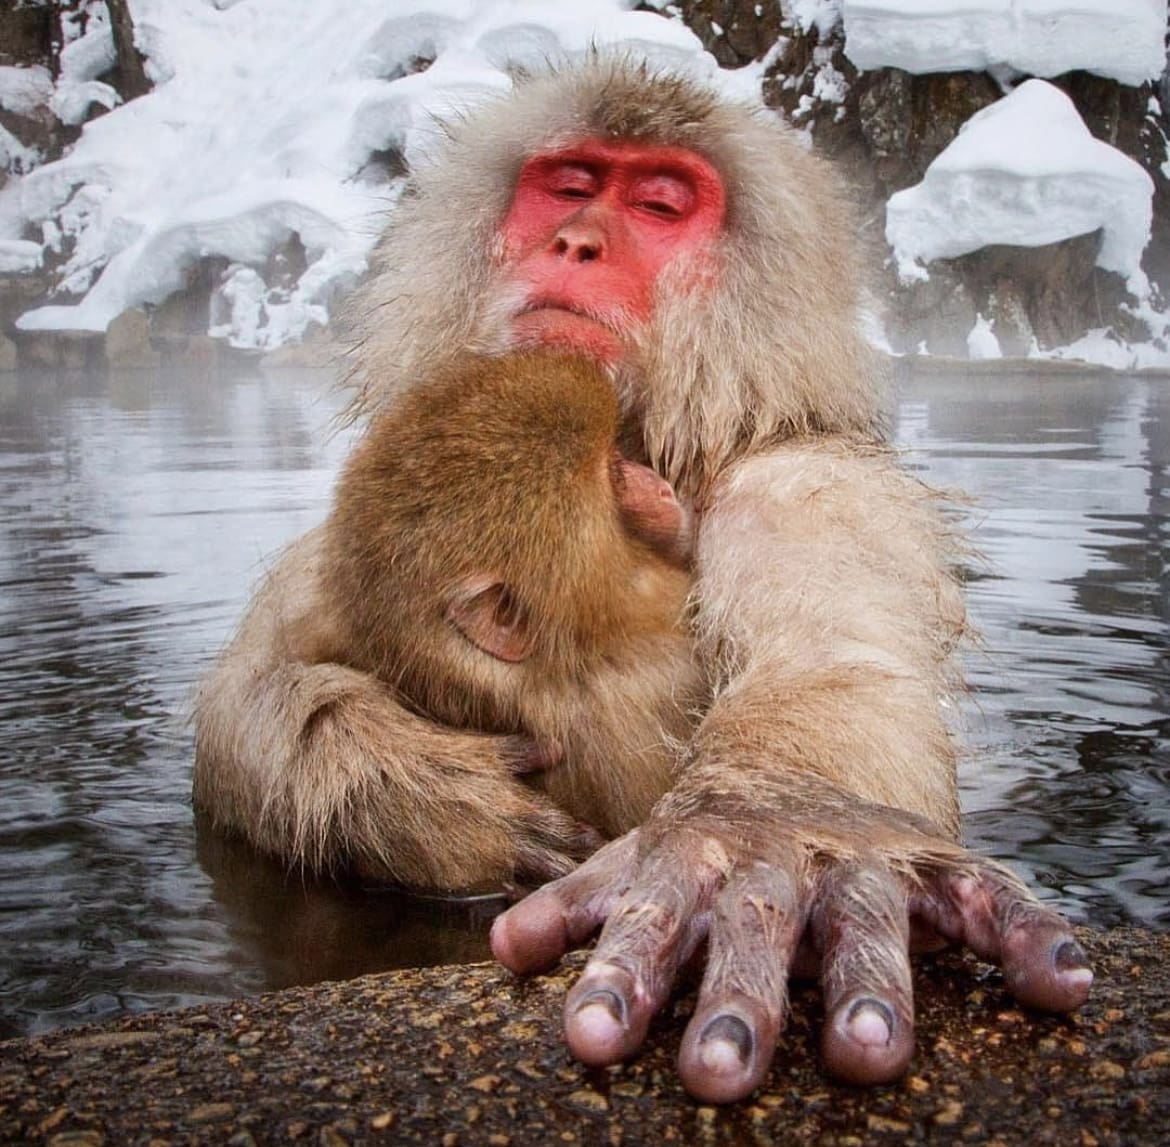 Japanese Macaque in a hot spring - 20 Awesome Animals in Japan